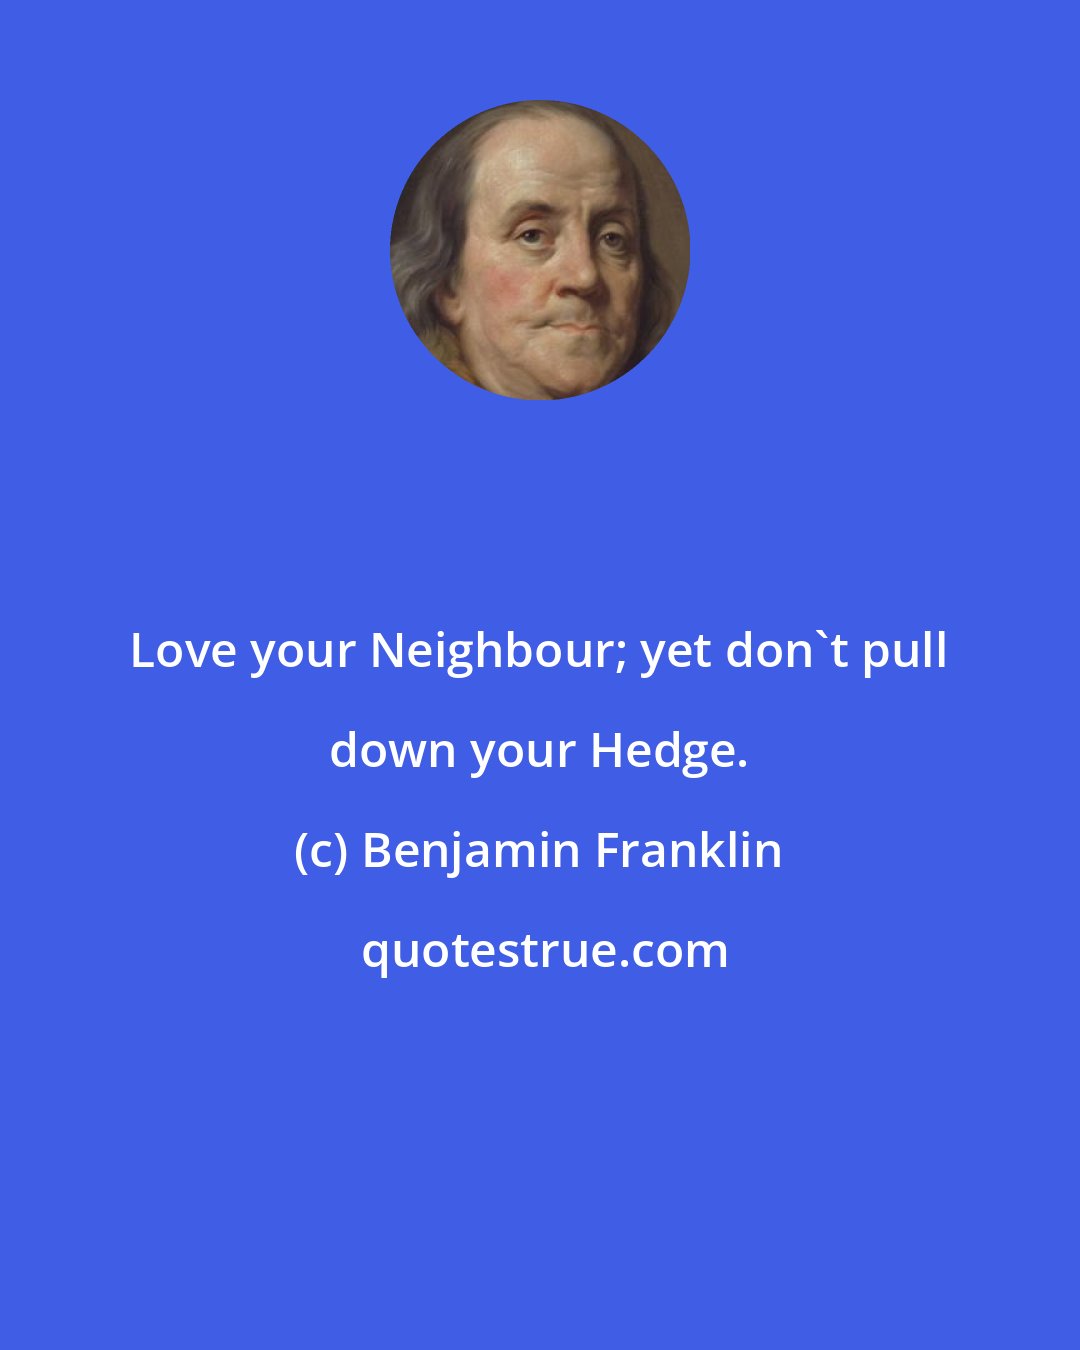 Benjamin Franklin: Love your Neighbour; yet don't pull down your Hedge.